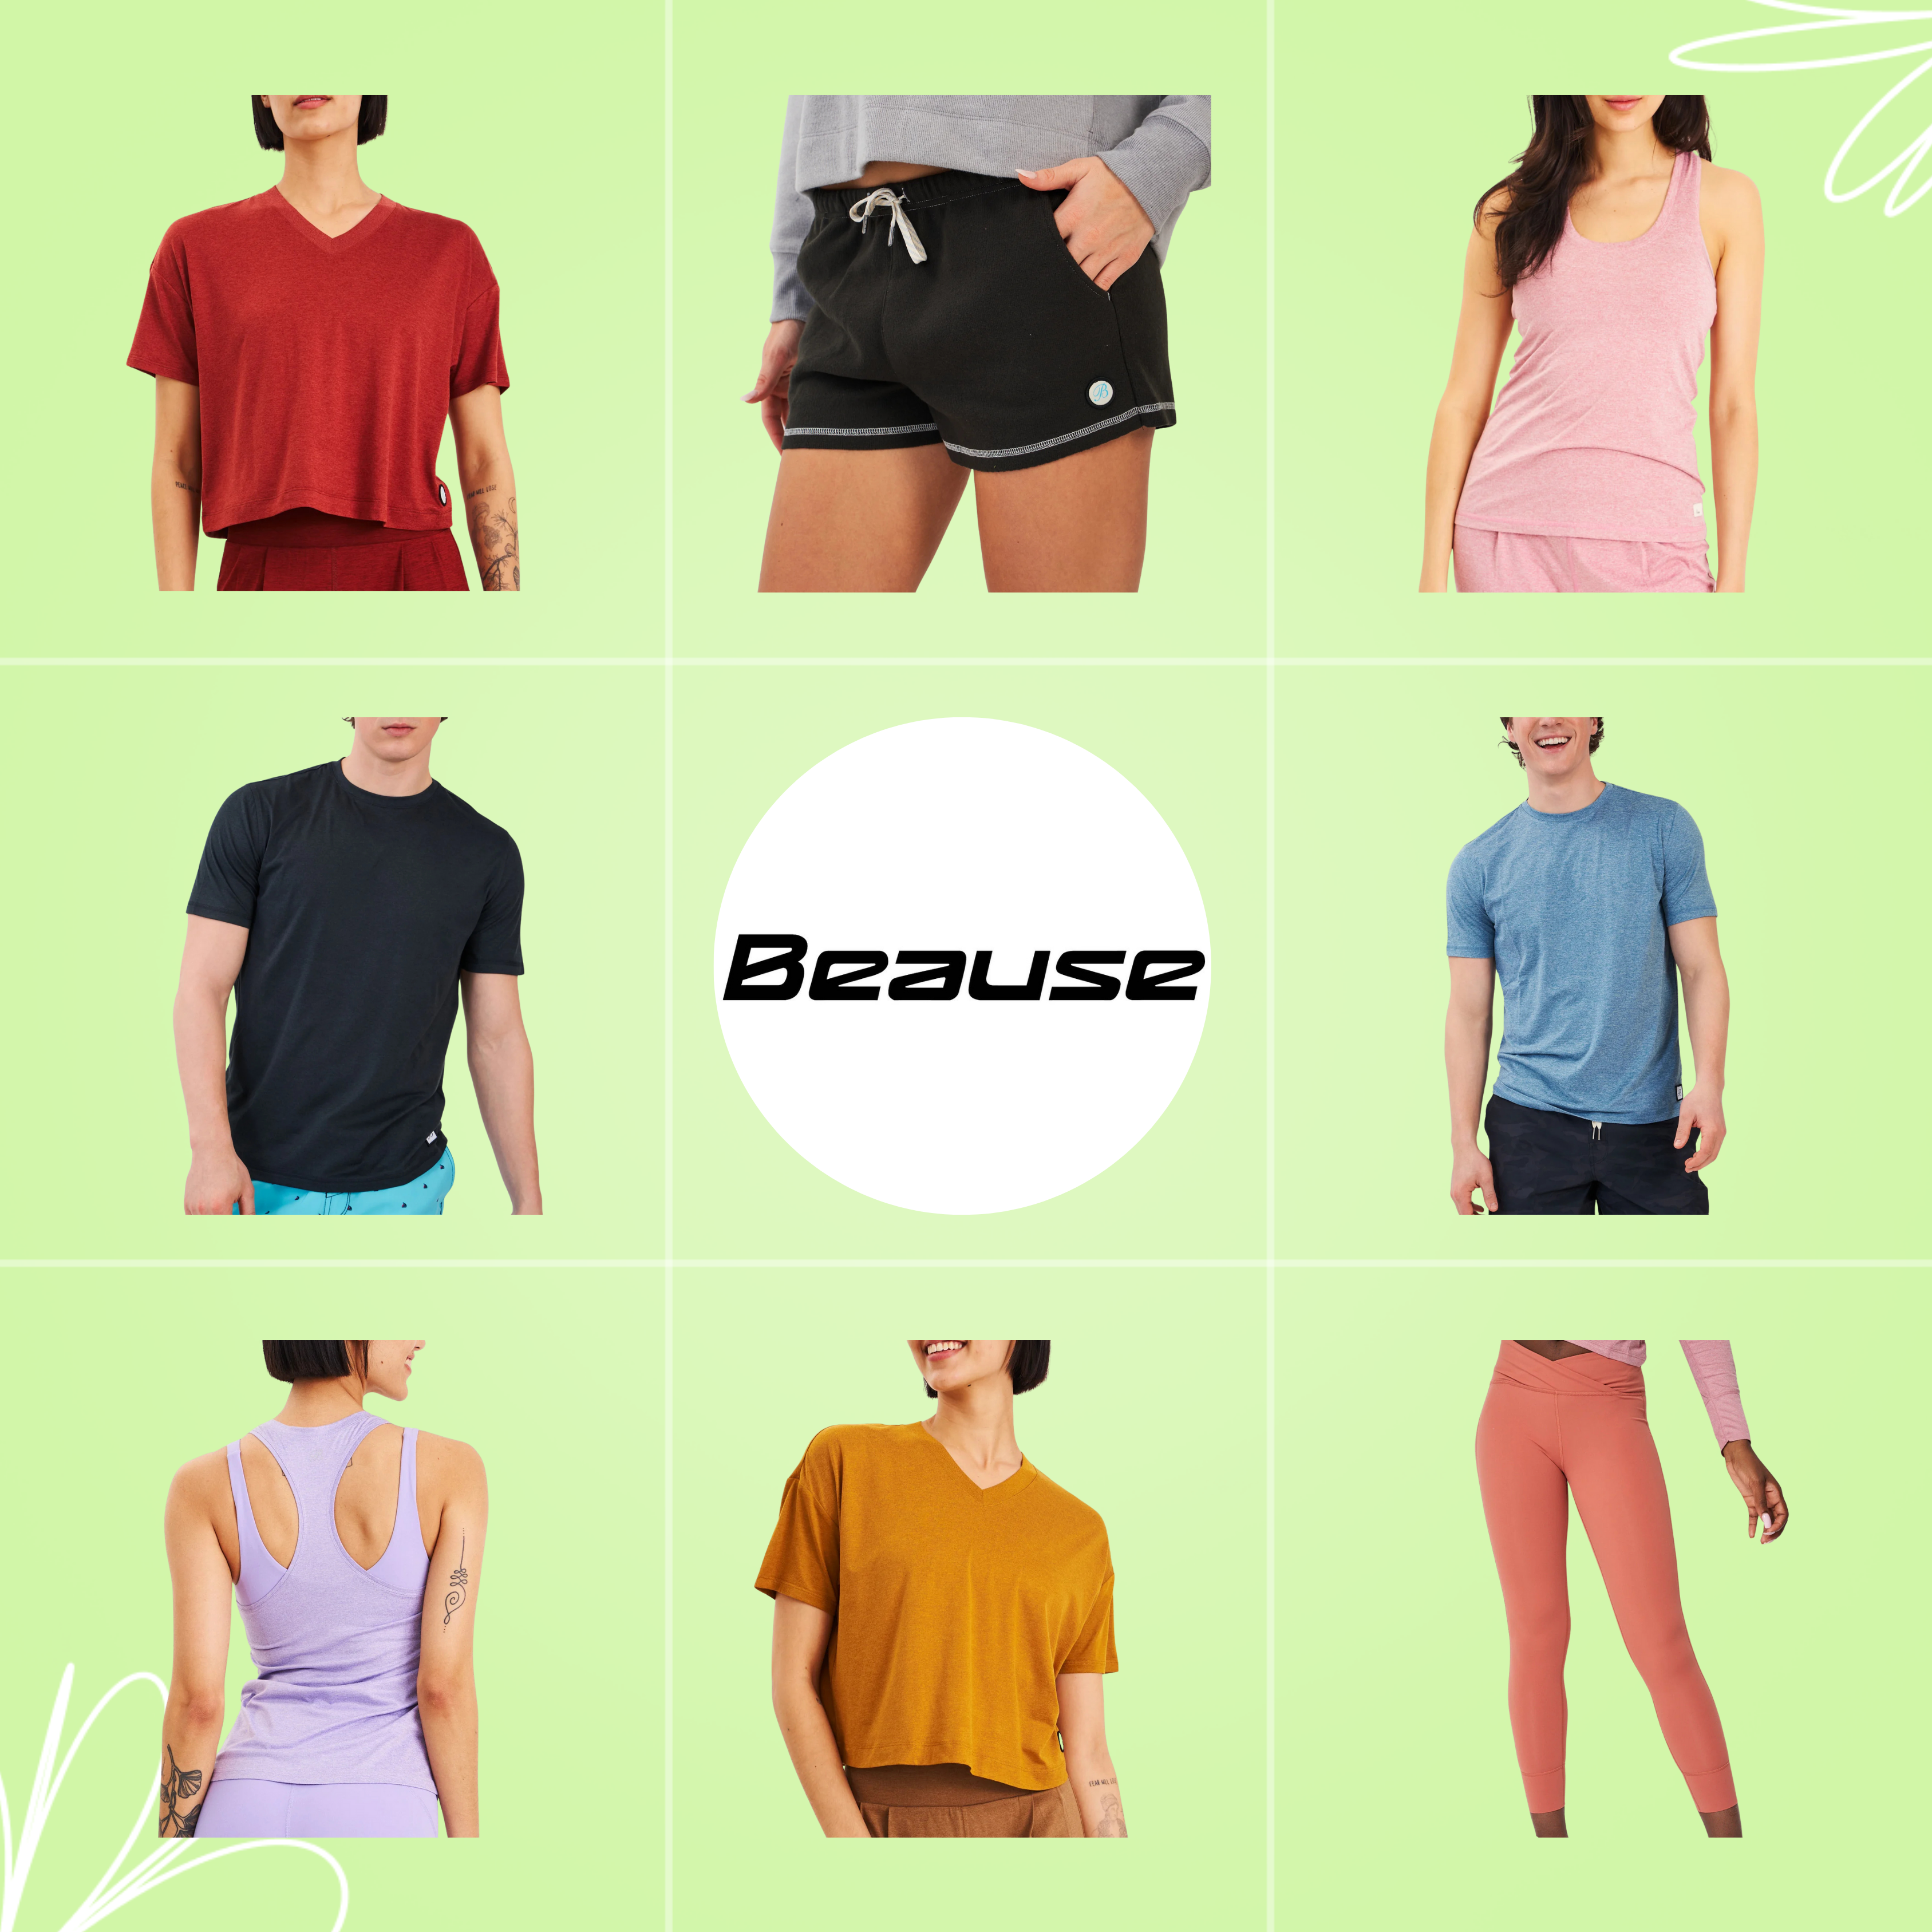 Brand image for Beause